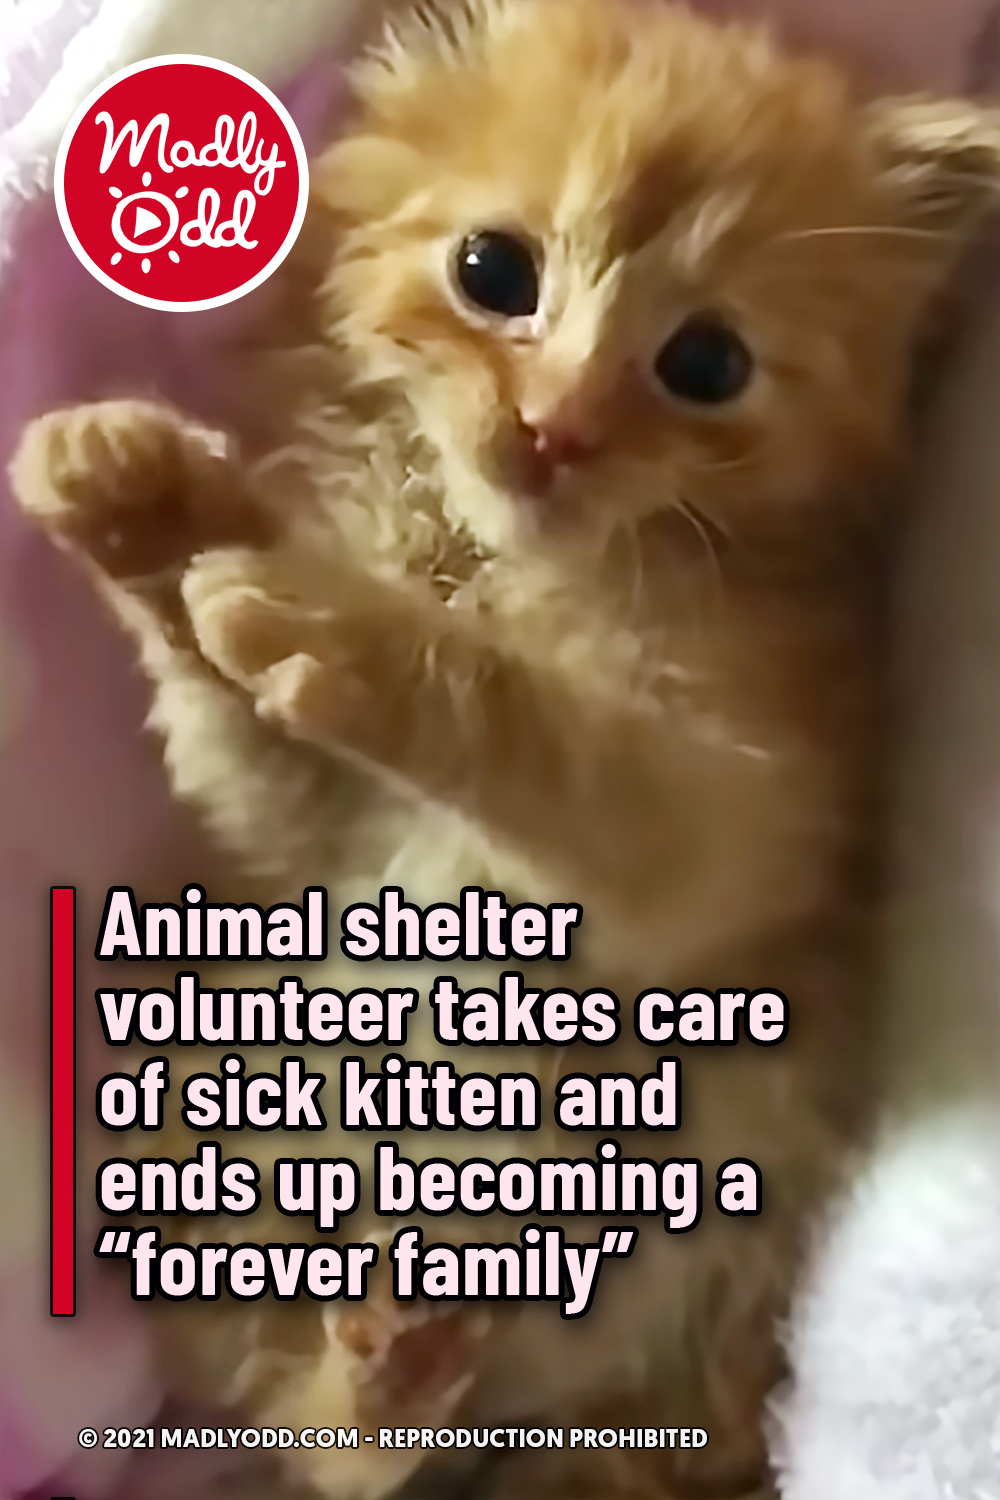 Animal shelter volunteer takes care of sick kitten and ends up becoming a “forever family”